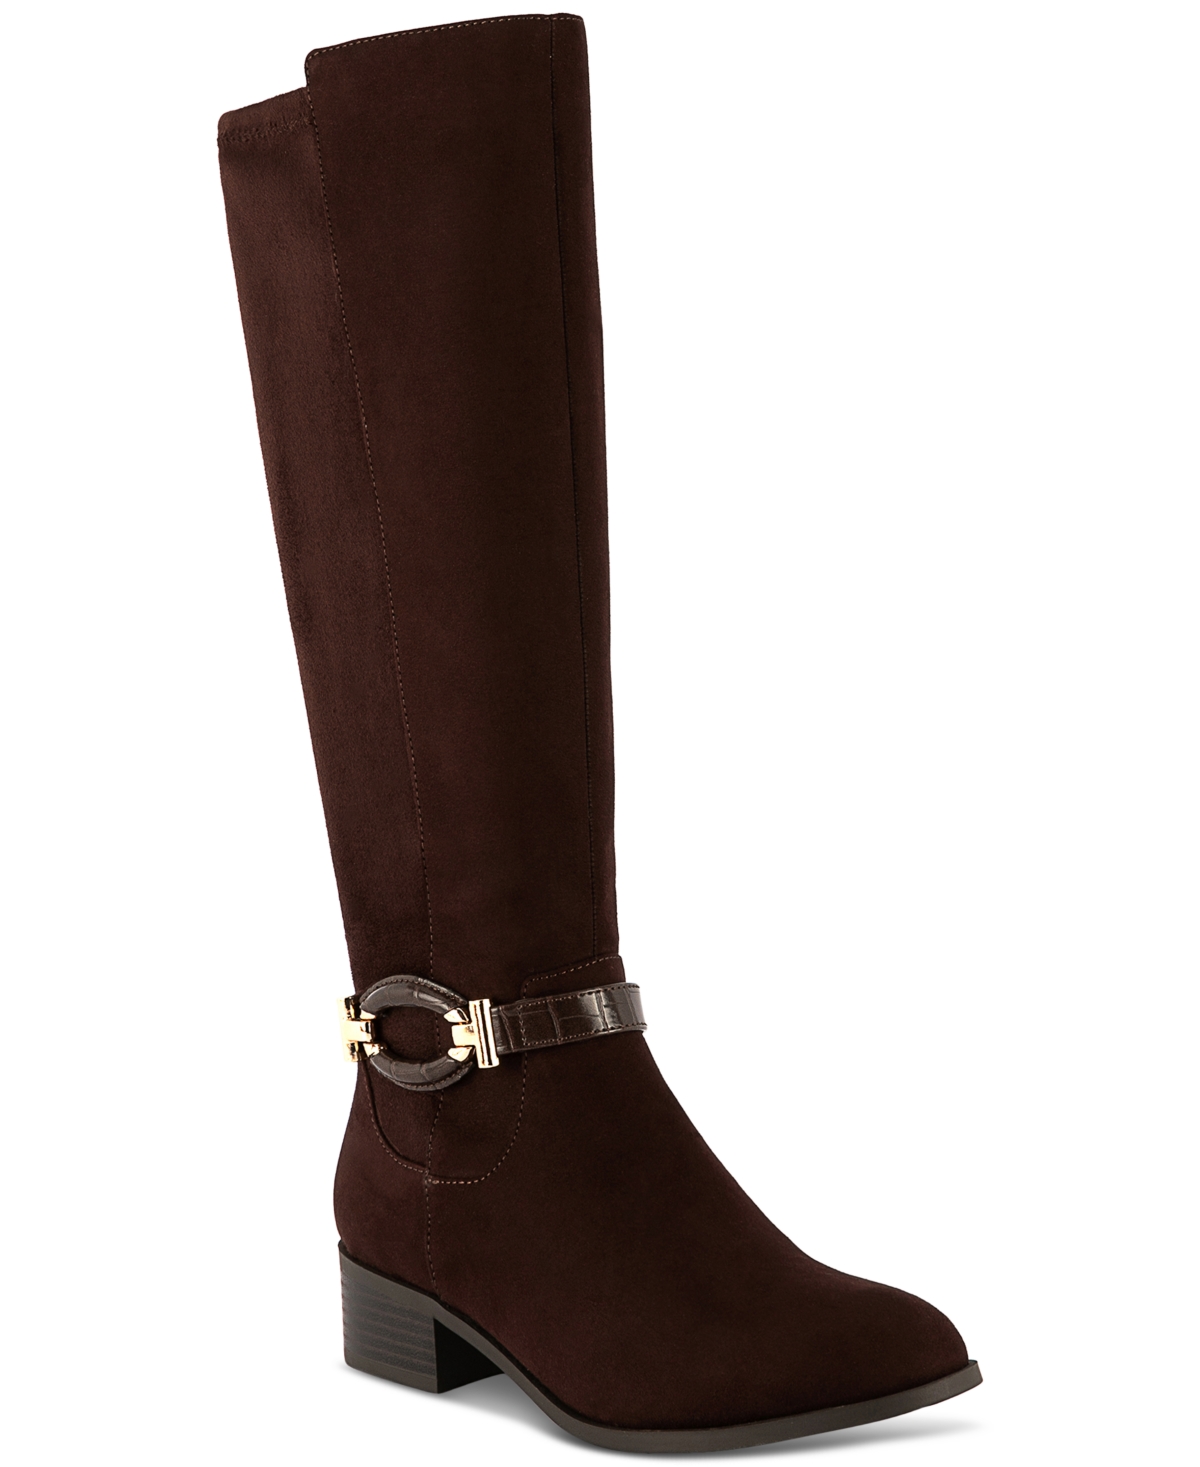 Stanell Buckled Riding Boots, Created for Macy's - Chocolate Micro